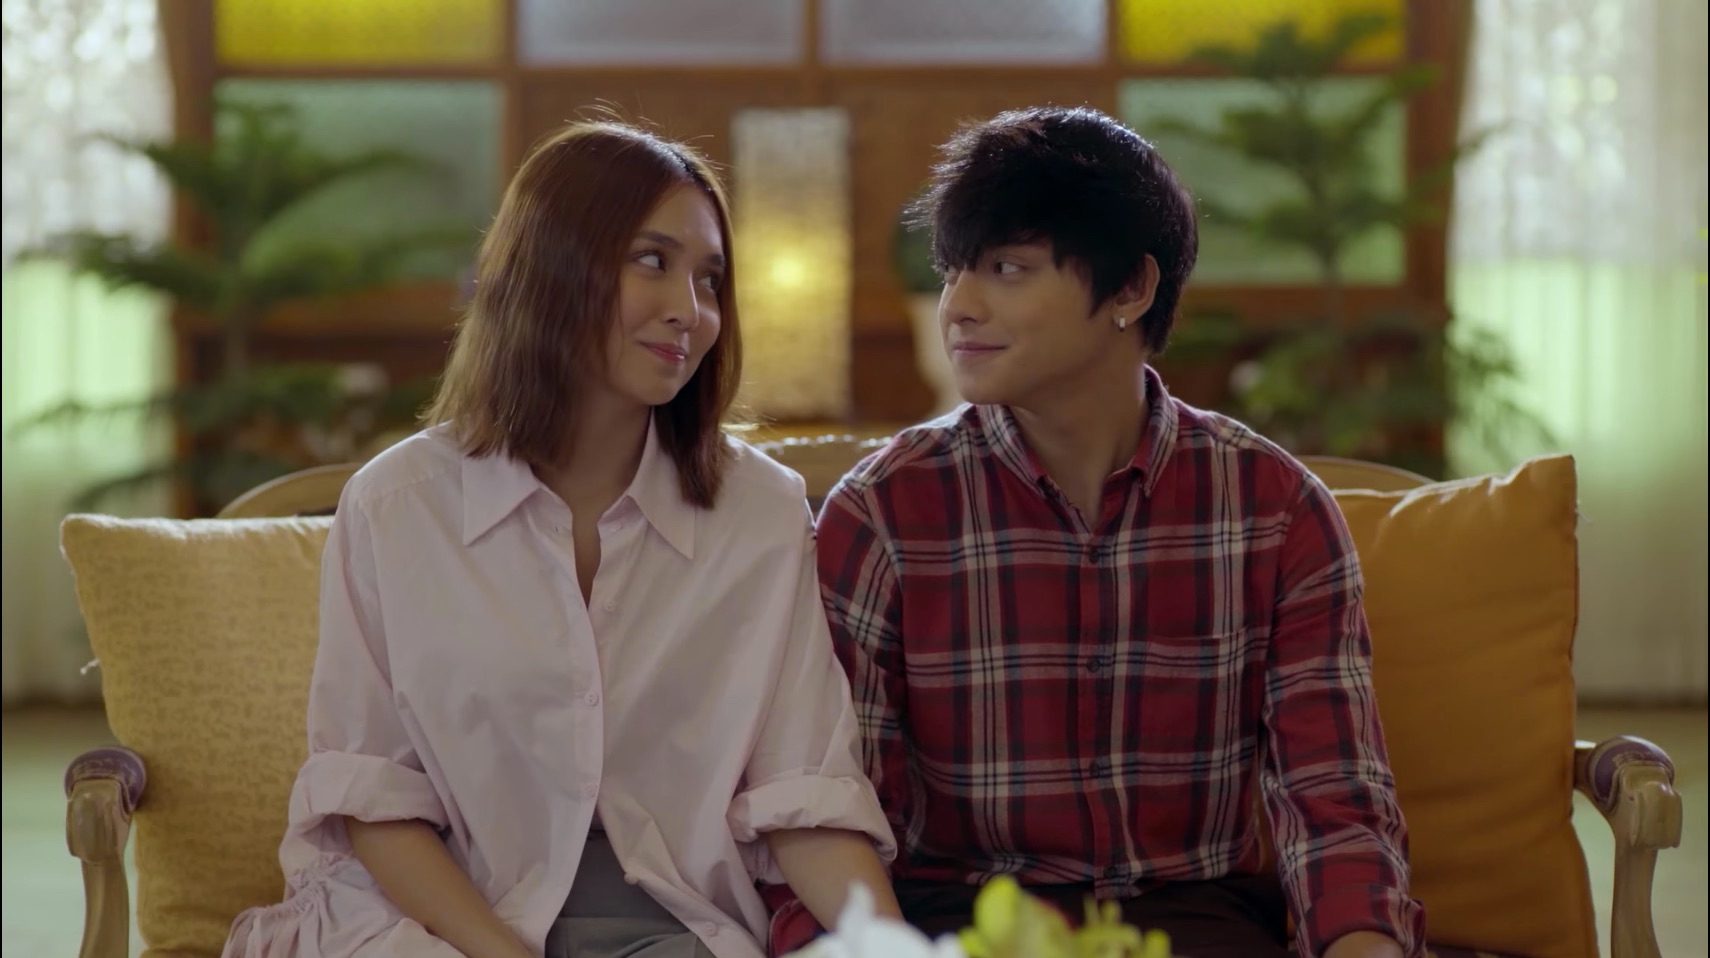 WATCH: Chaos, cabin fever, and kilig in ‘The House Arrest Of Us’ trailer